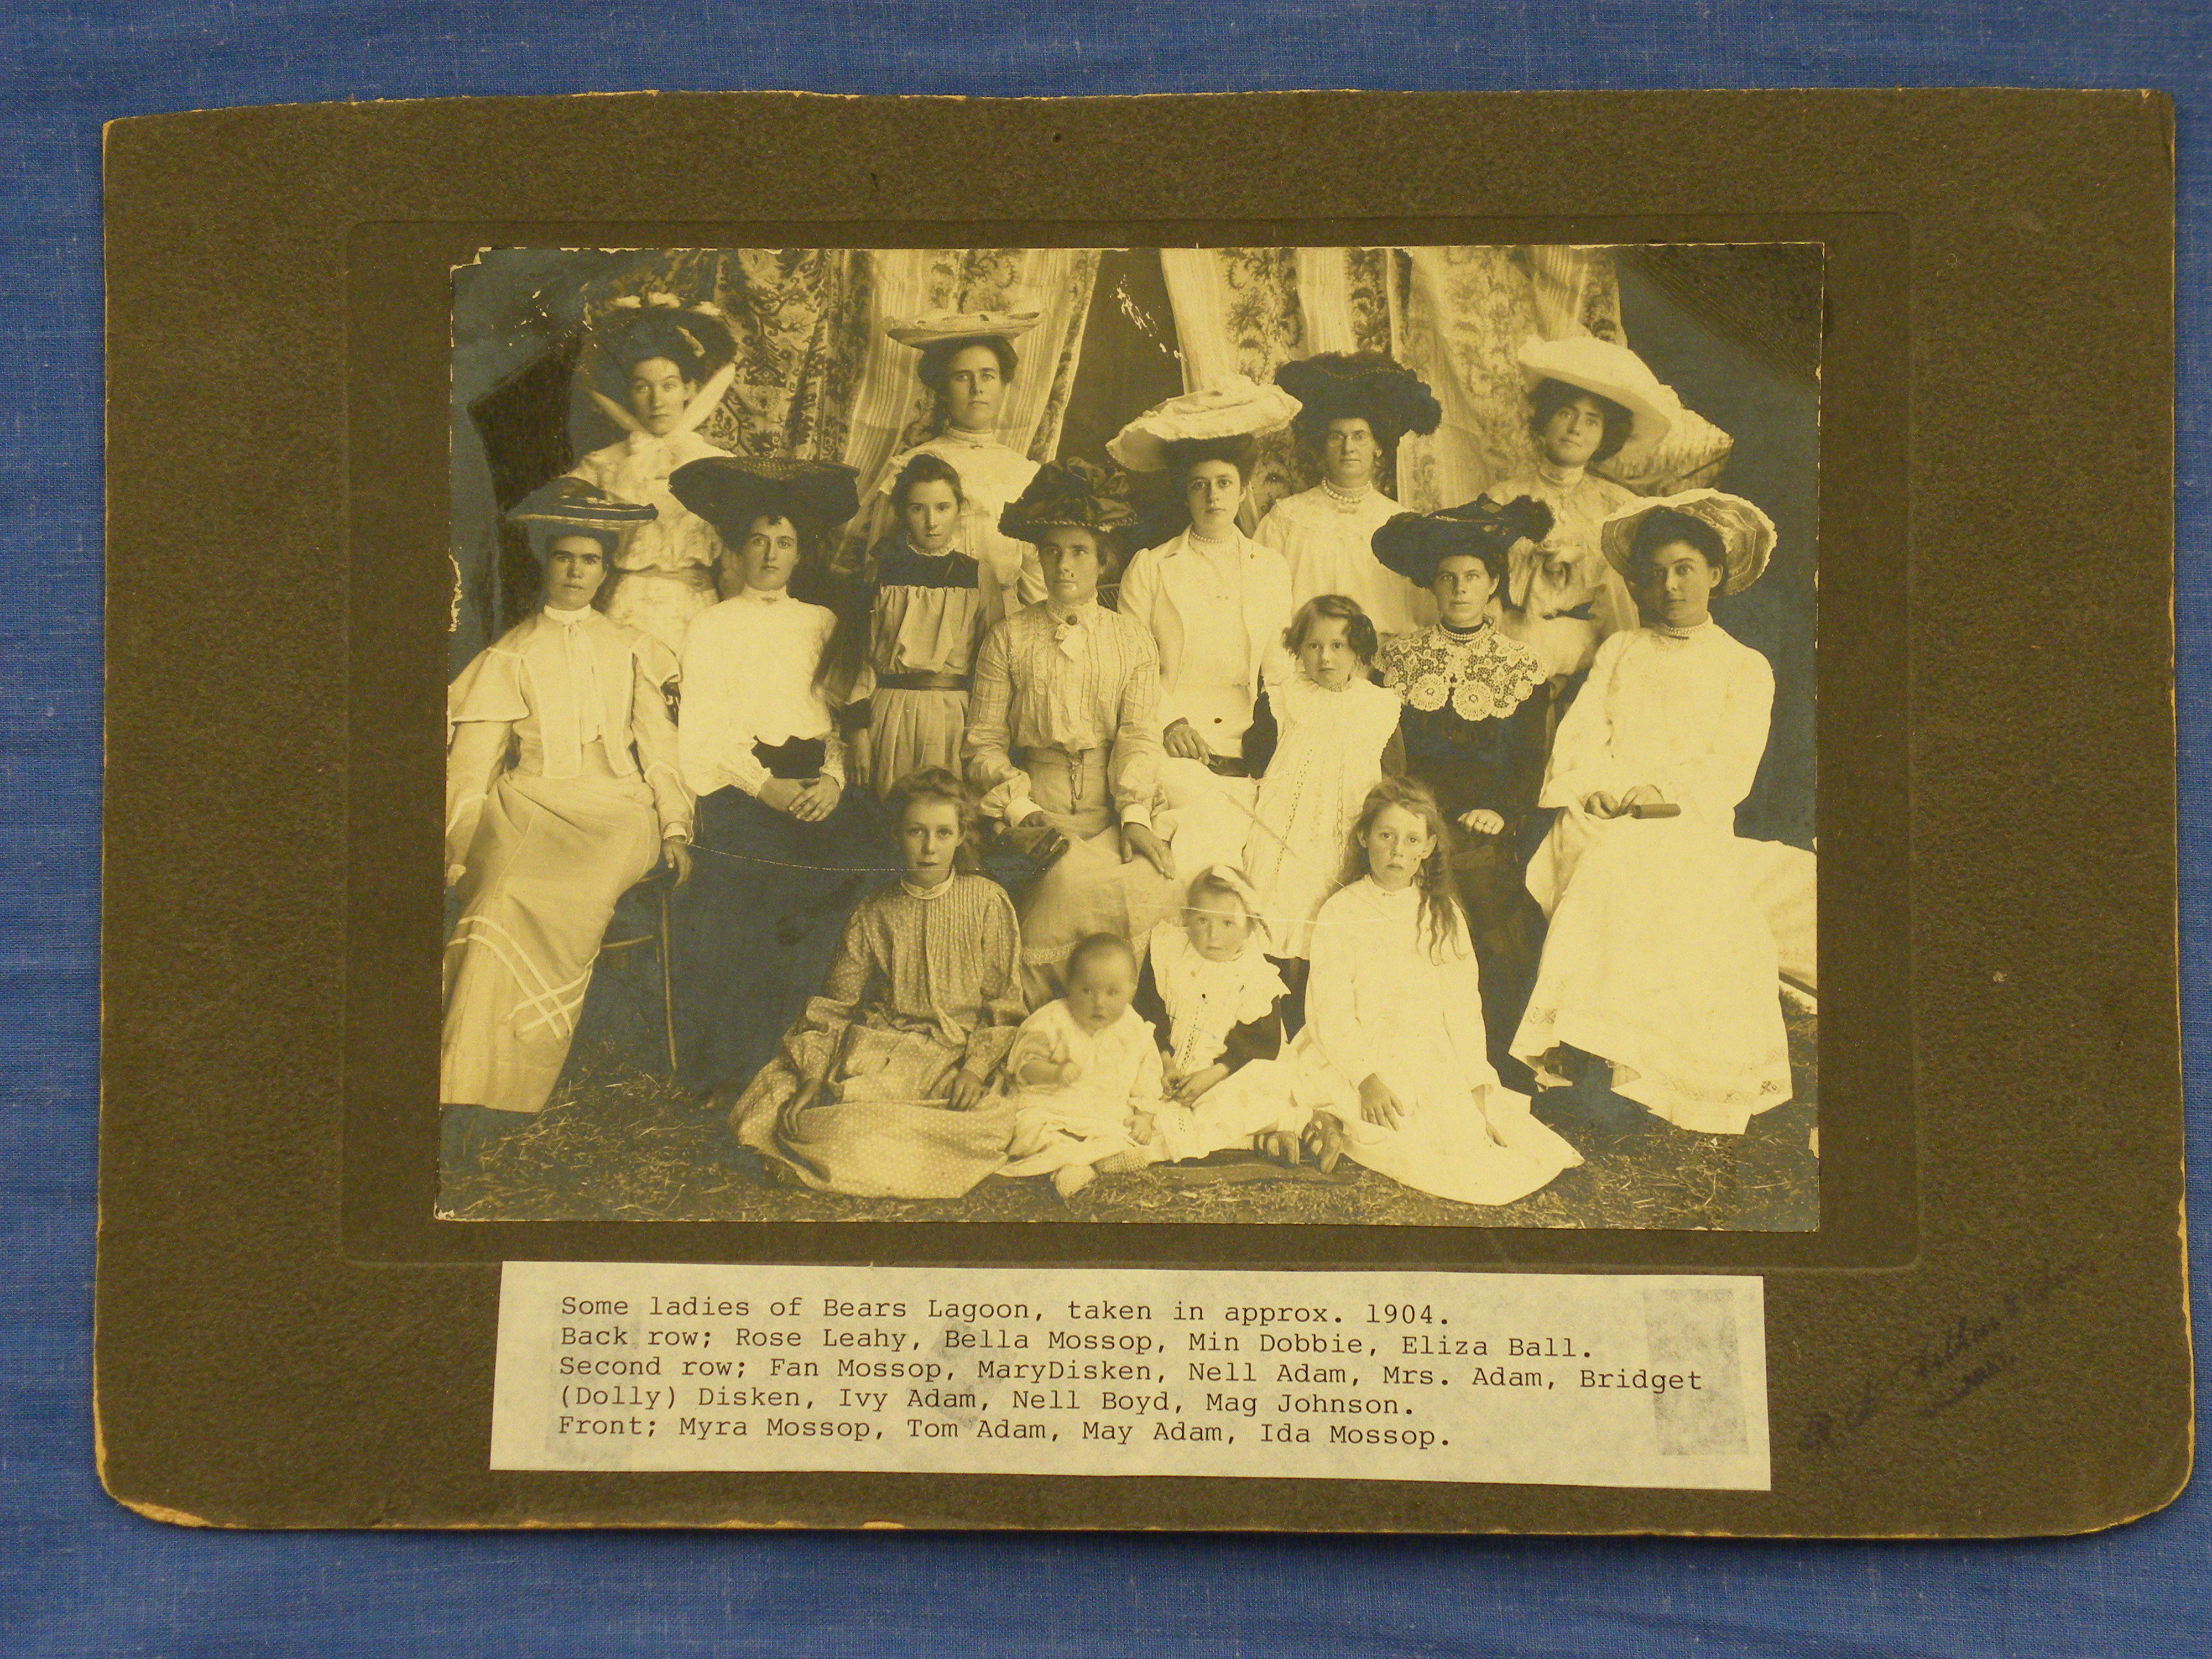 Black and white photograph of a group of women from Bears Lagoon.